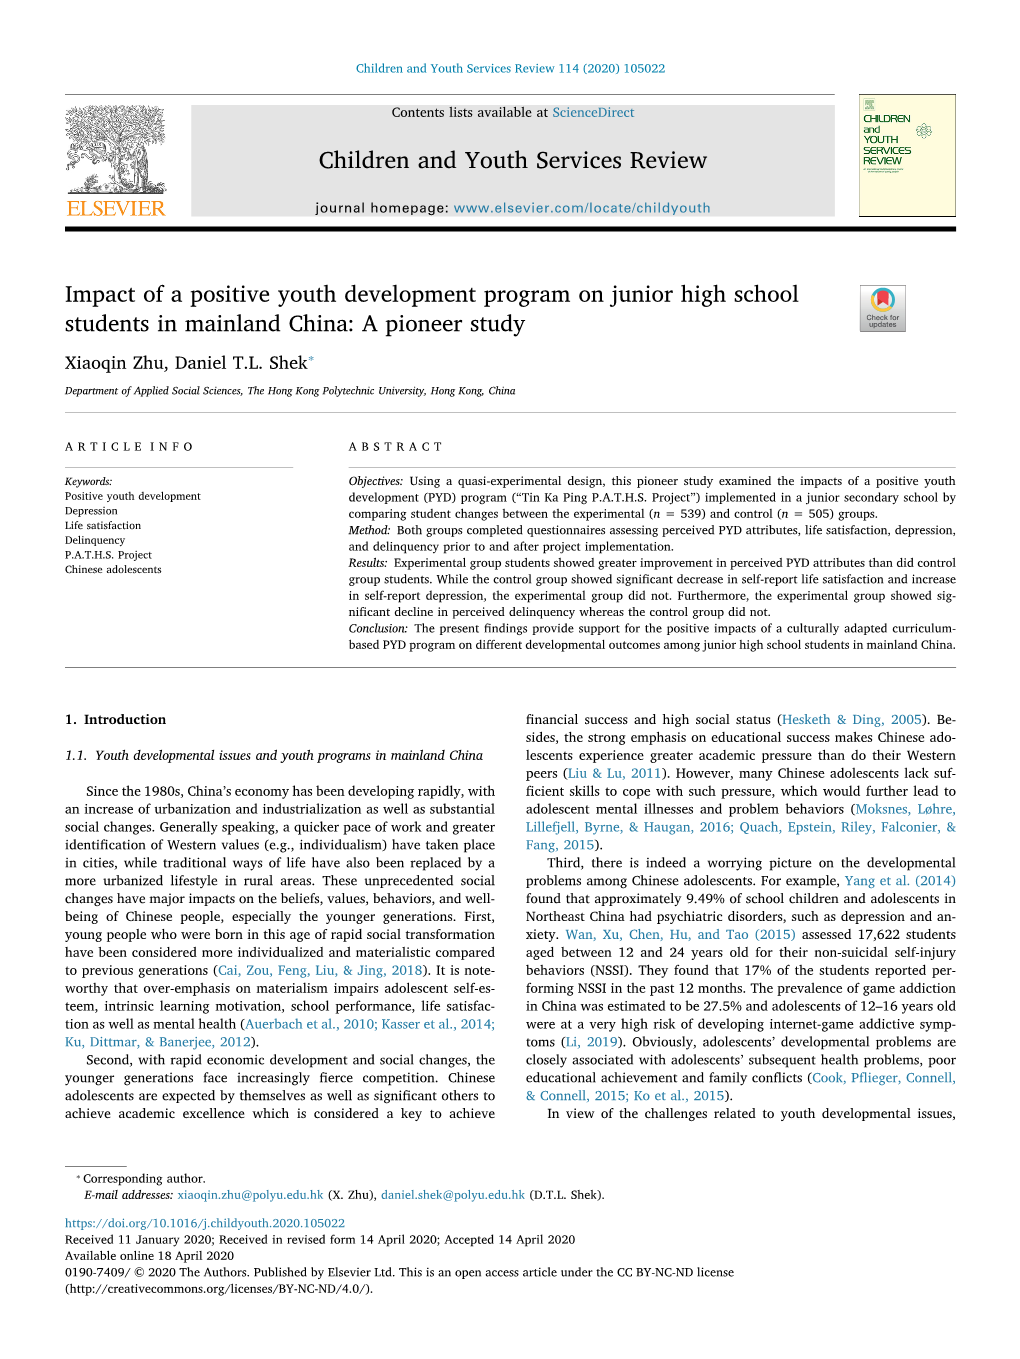 Impact of a Positive Youth Development Program on Junior High School Students in Mainland China: a Pioneer Study T ⁎ Xiaoqin Zhu, Daniel T.L